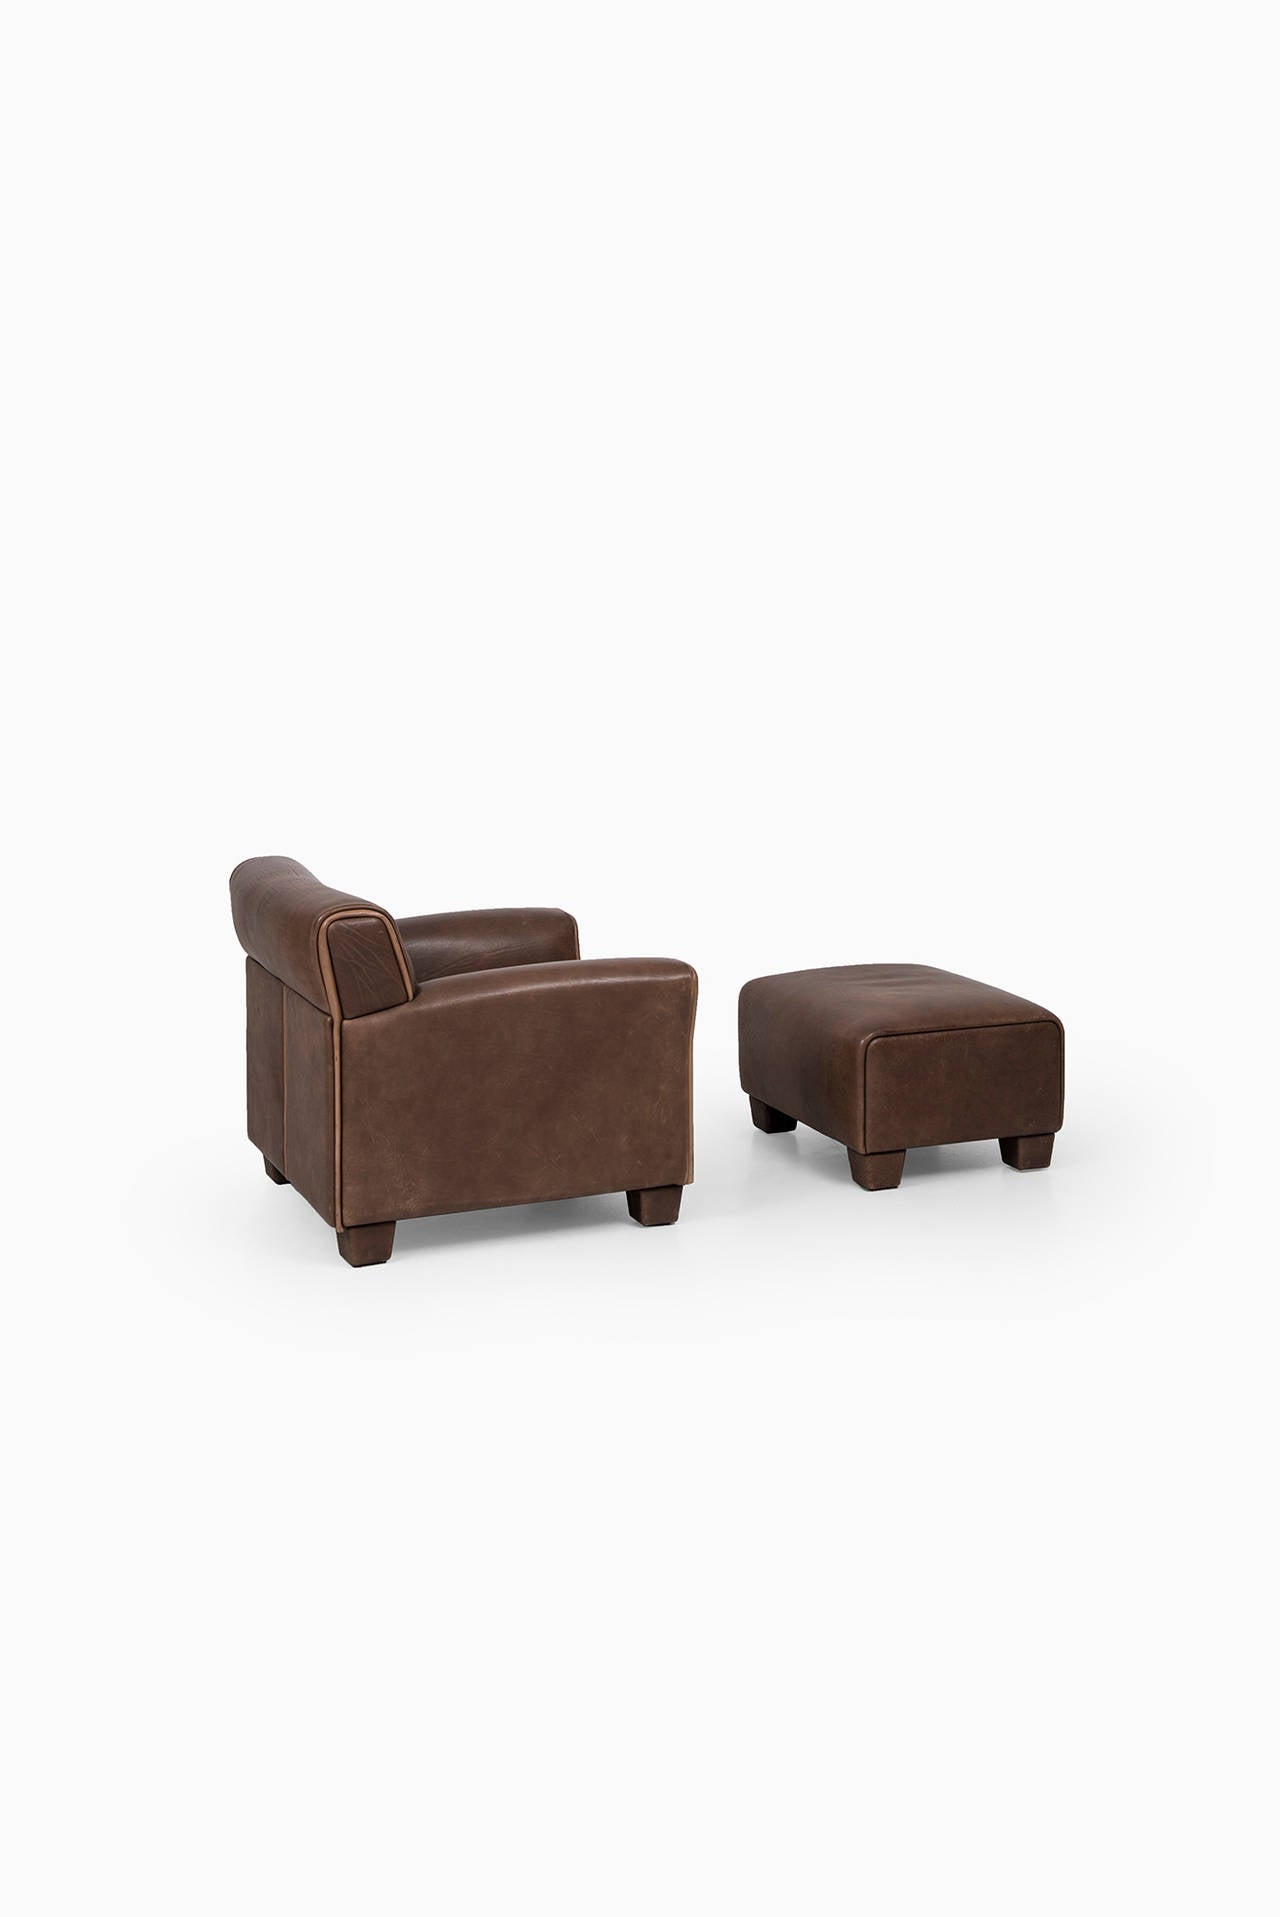 Leather de Sede easy chair with stool by de Sede in Switzerland